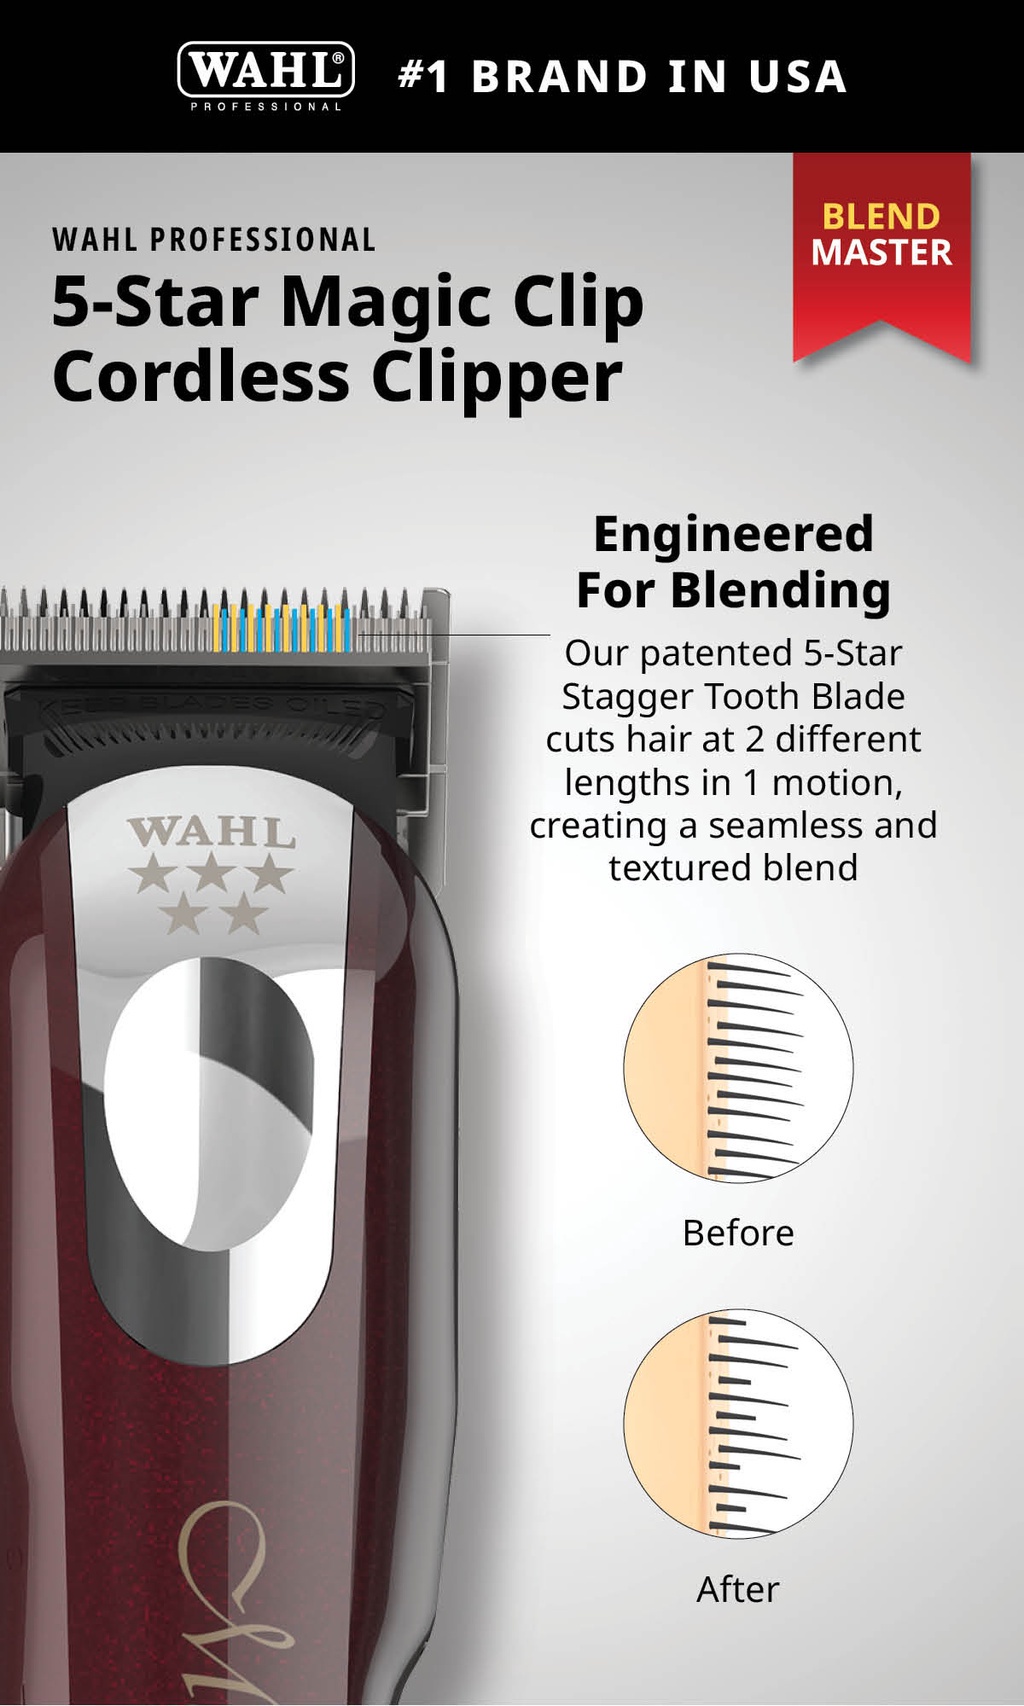 Wahl Professional 5 Star Magic Clip Cordless Clipper - Shaver, Trimmer,  Grooming Tool, Hair Cut | Shopee Singapore